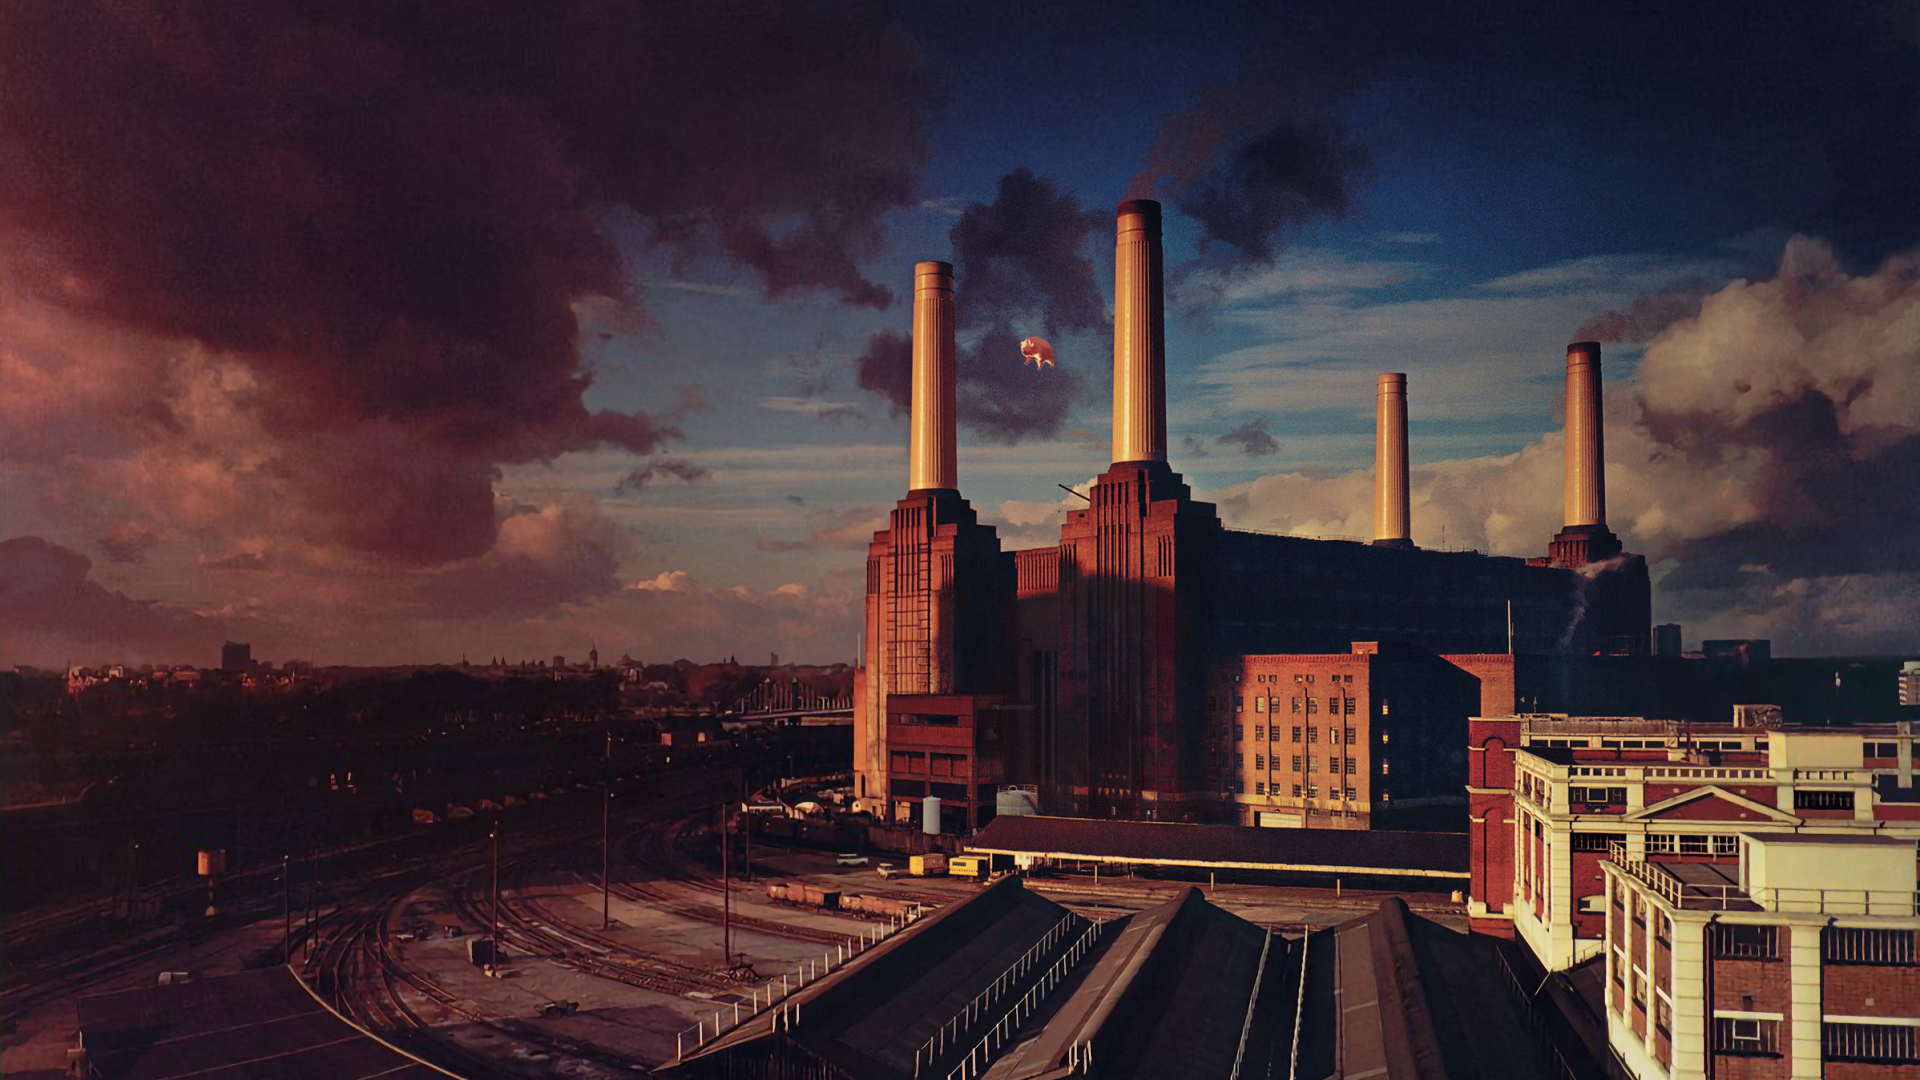 pink floyd hd music videos concerts